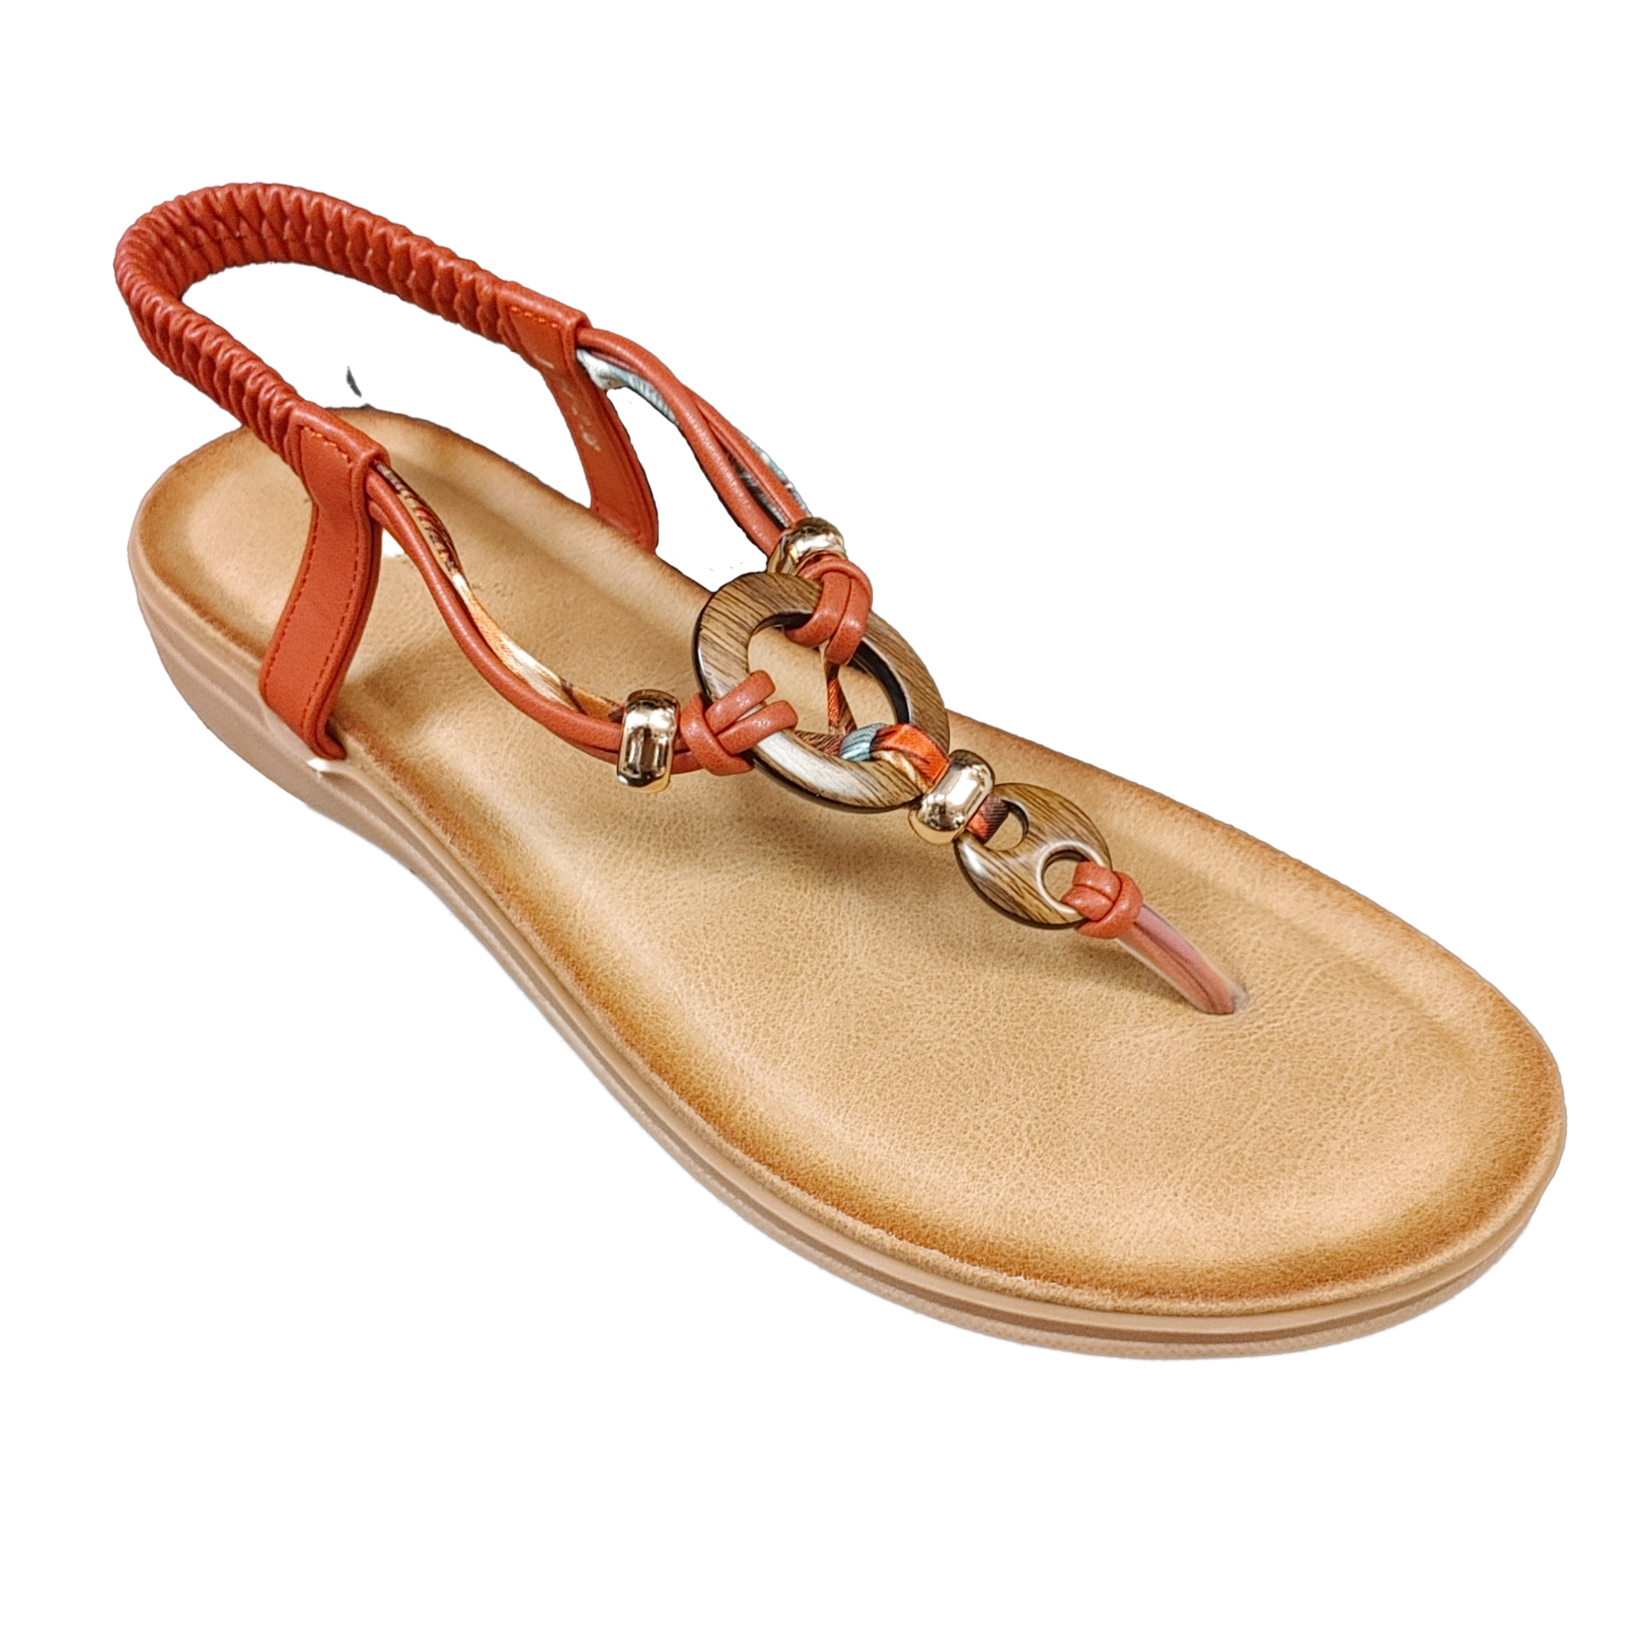 Miss Sweet Miss Sweet flat thong sandal with beads and wood detail, sandals